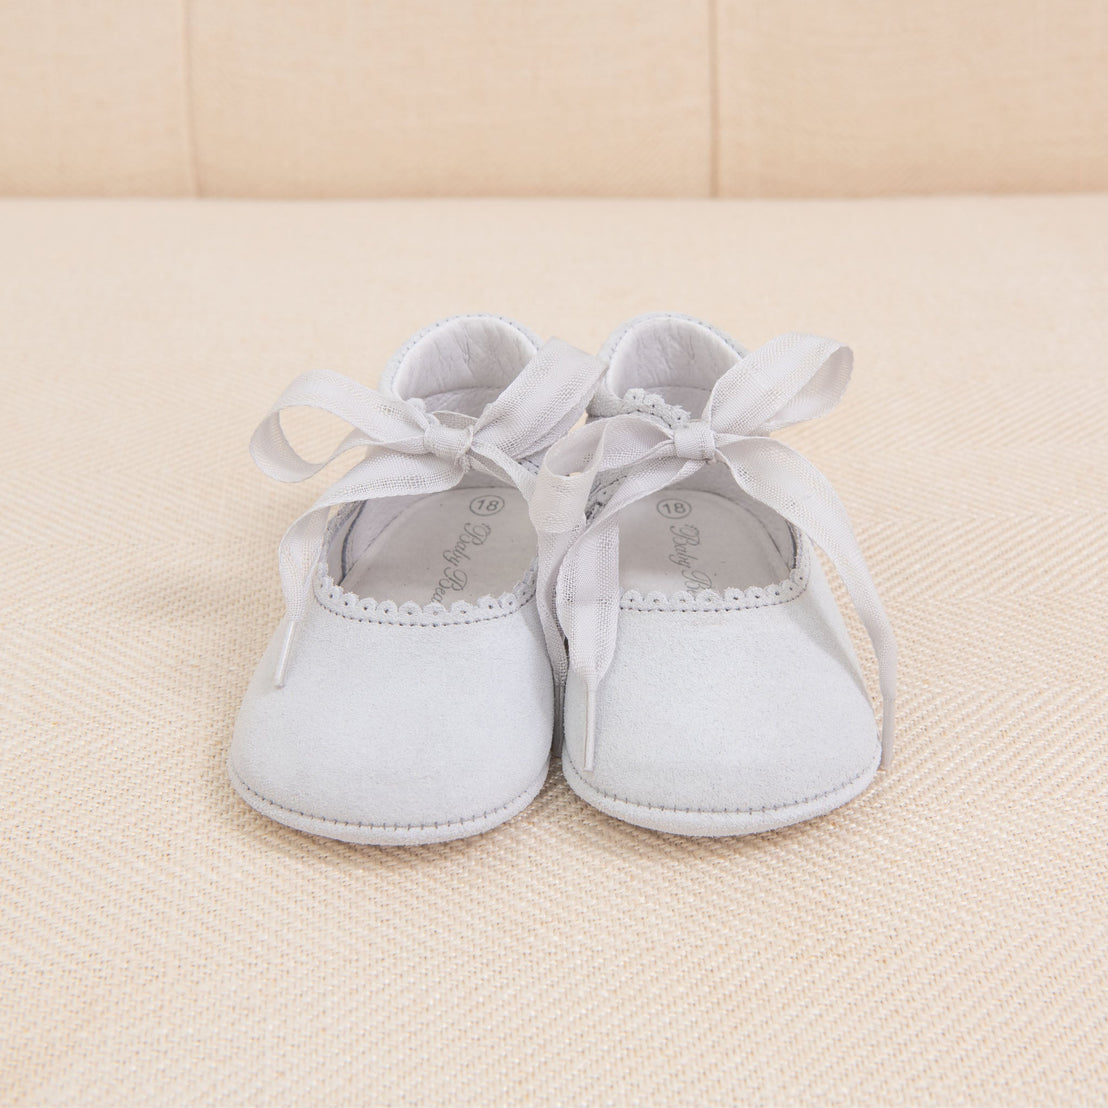 A pair of Thea Suede Tie Mary Janes in light gray with white ribbon ties, ideal for a first birthday, placed on a traditional beige fabric surface.